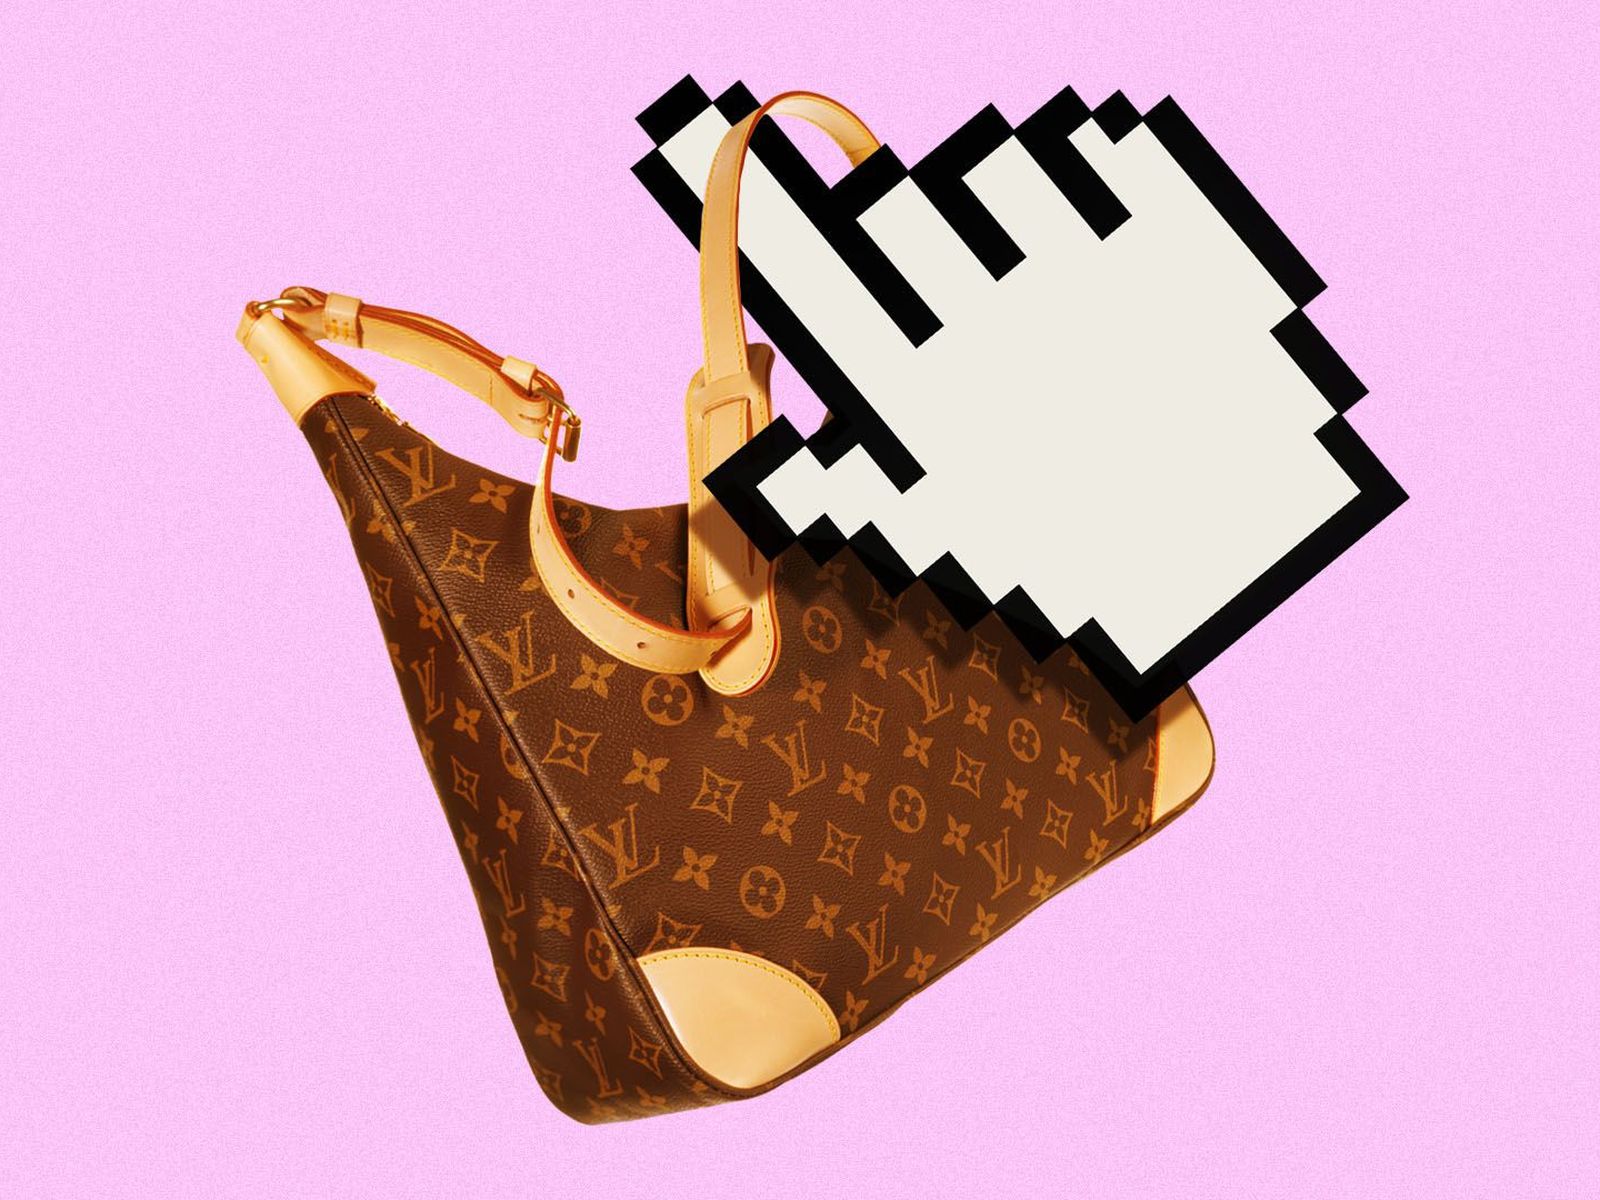 How Will Resale Sites Respond to an Expected Flood of Looted Luxury Goods?  - The Fashion Law